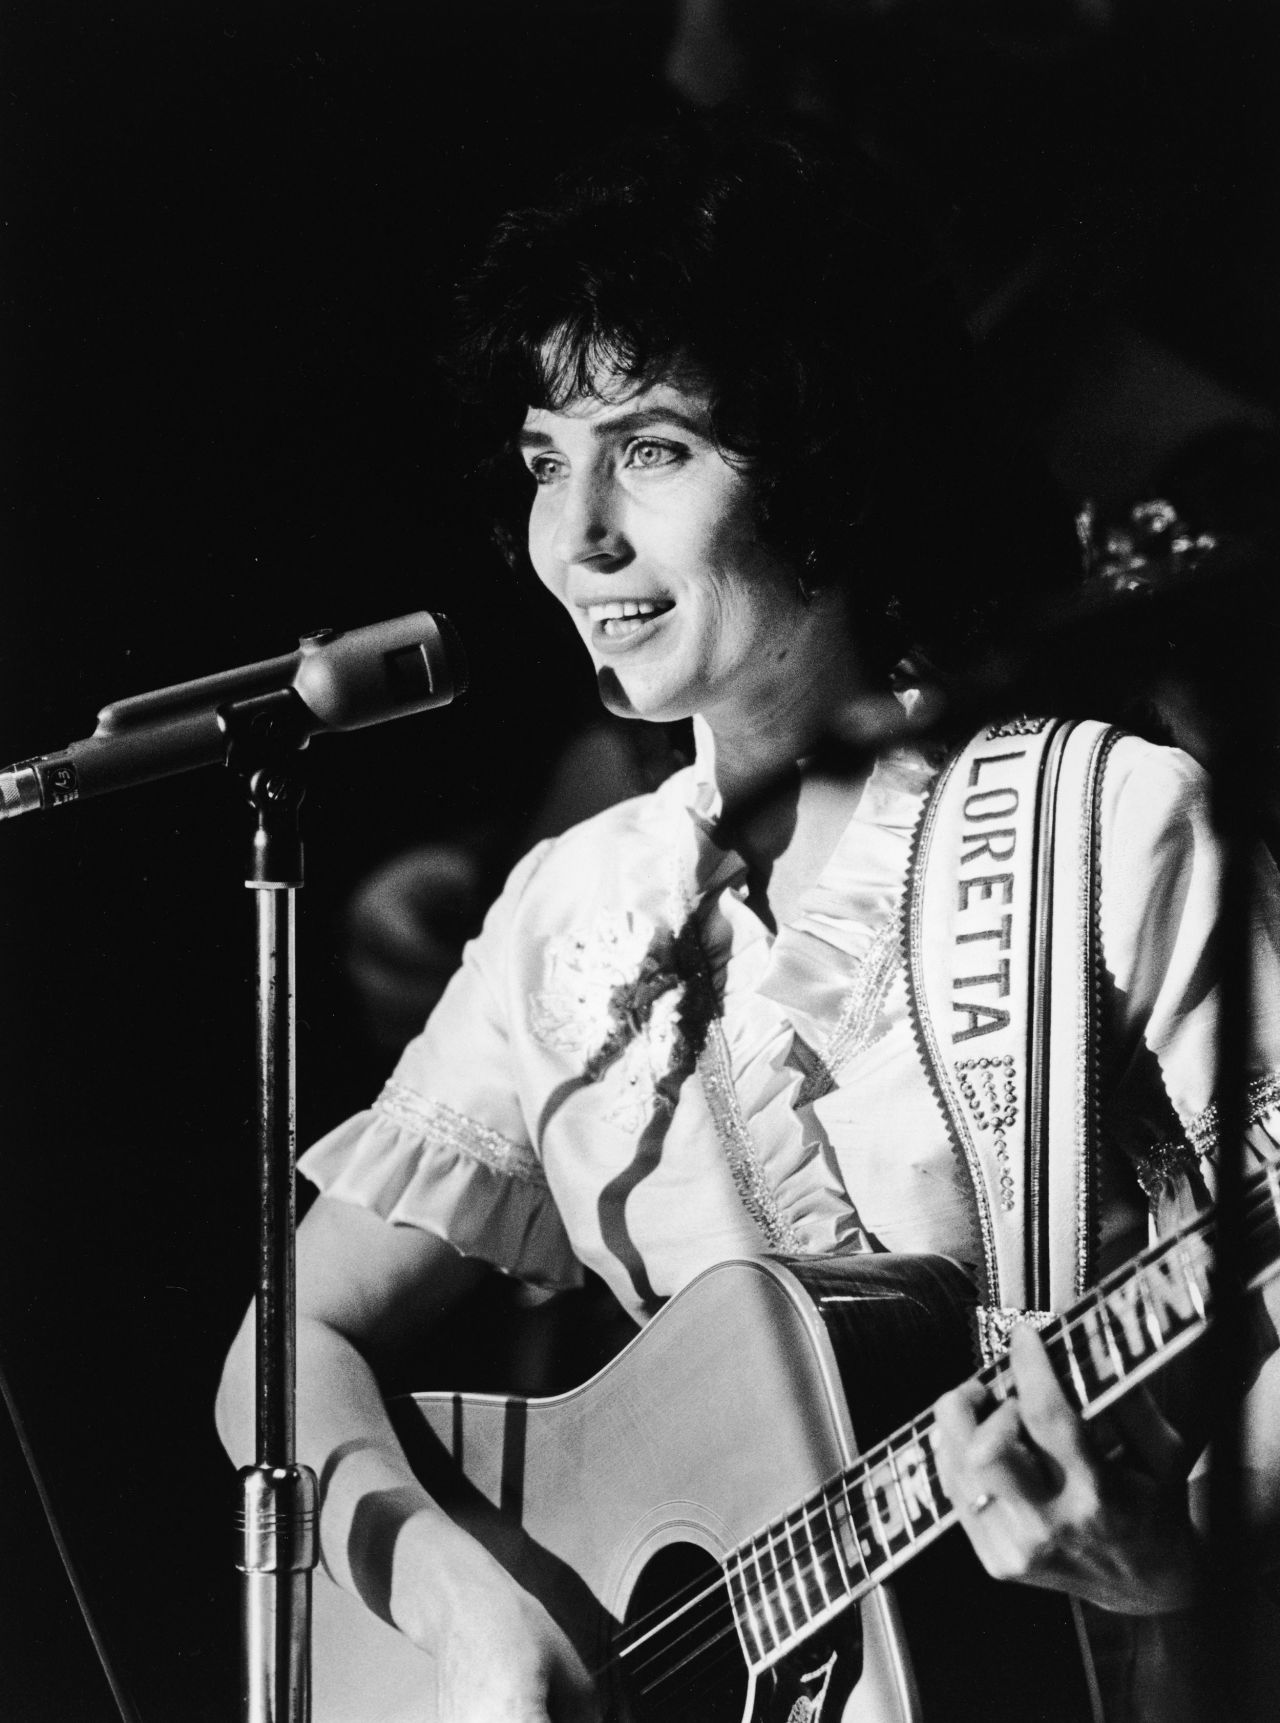 Lynn performs on stage at the Grand Ole Opry in the '60s.